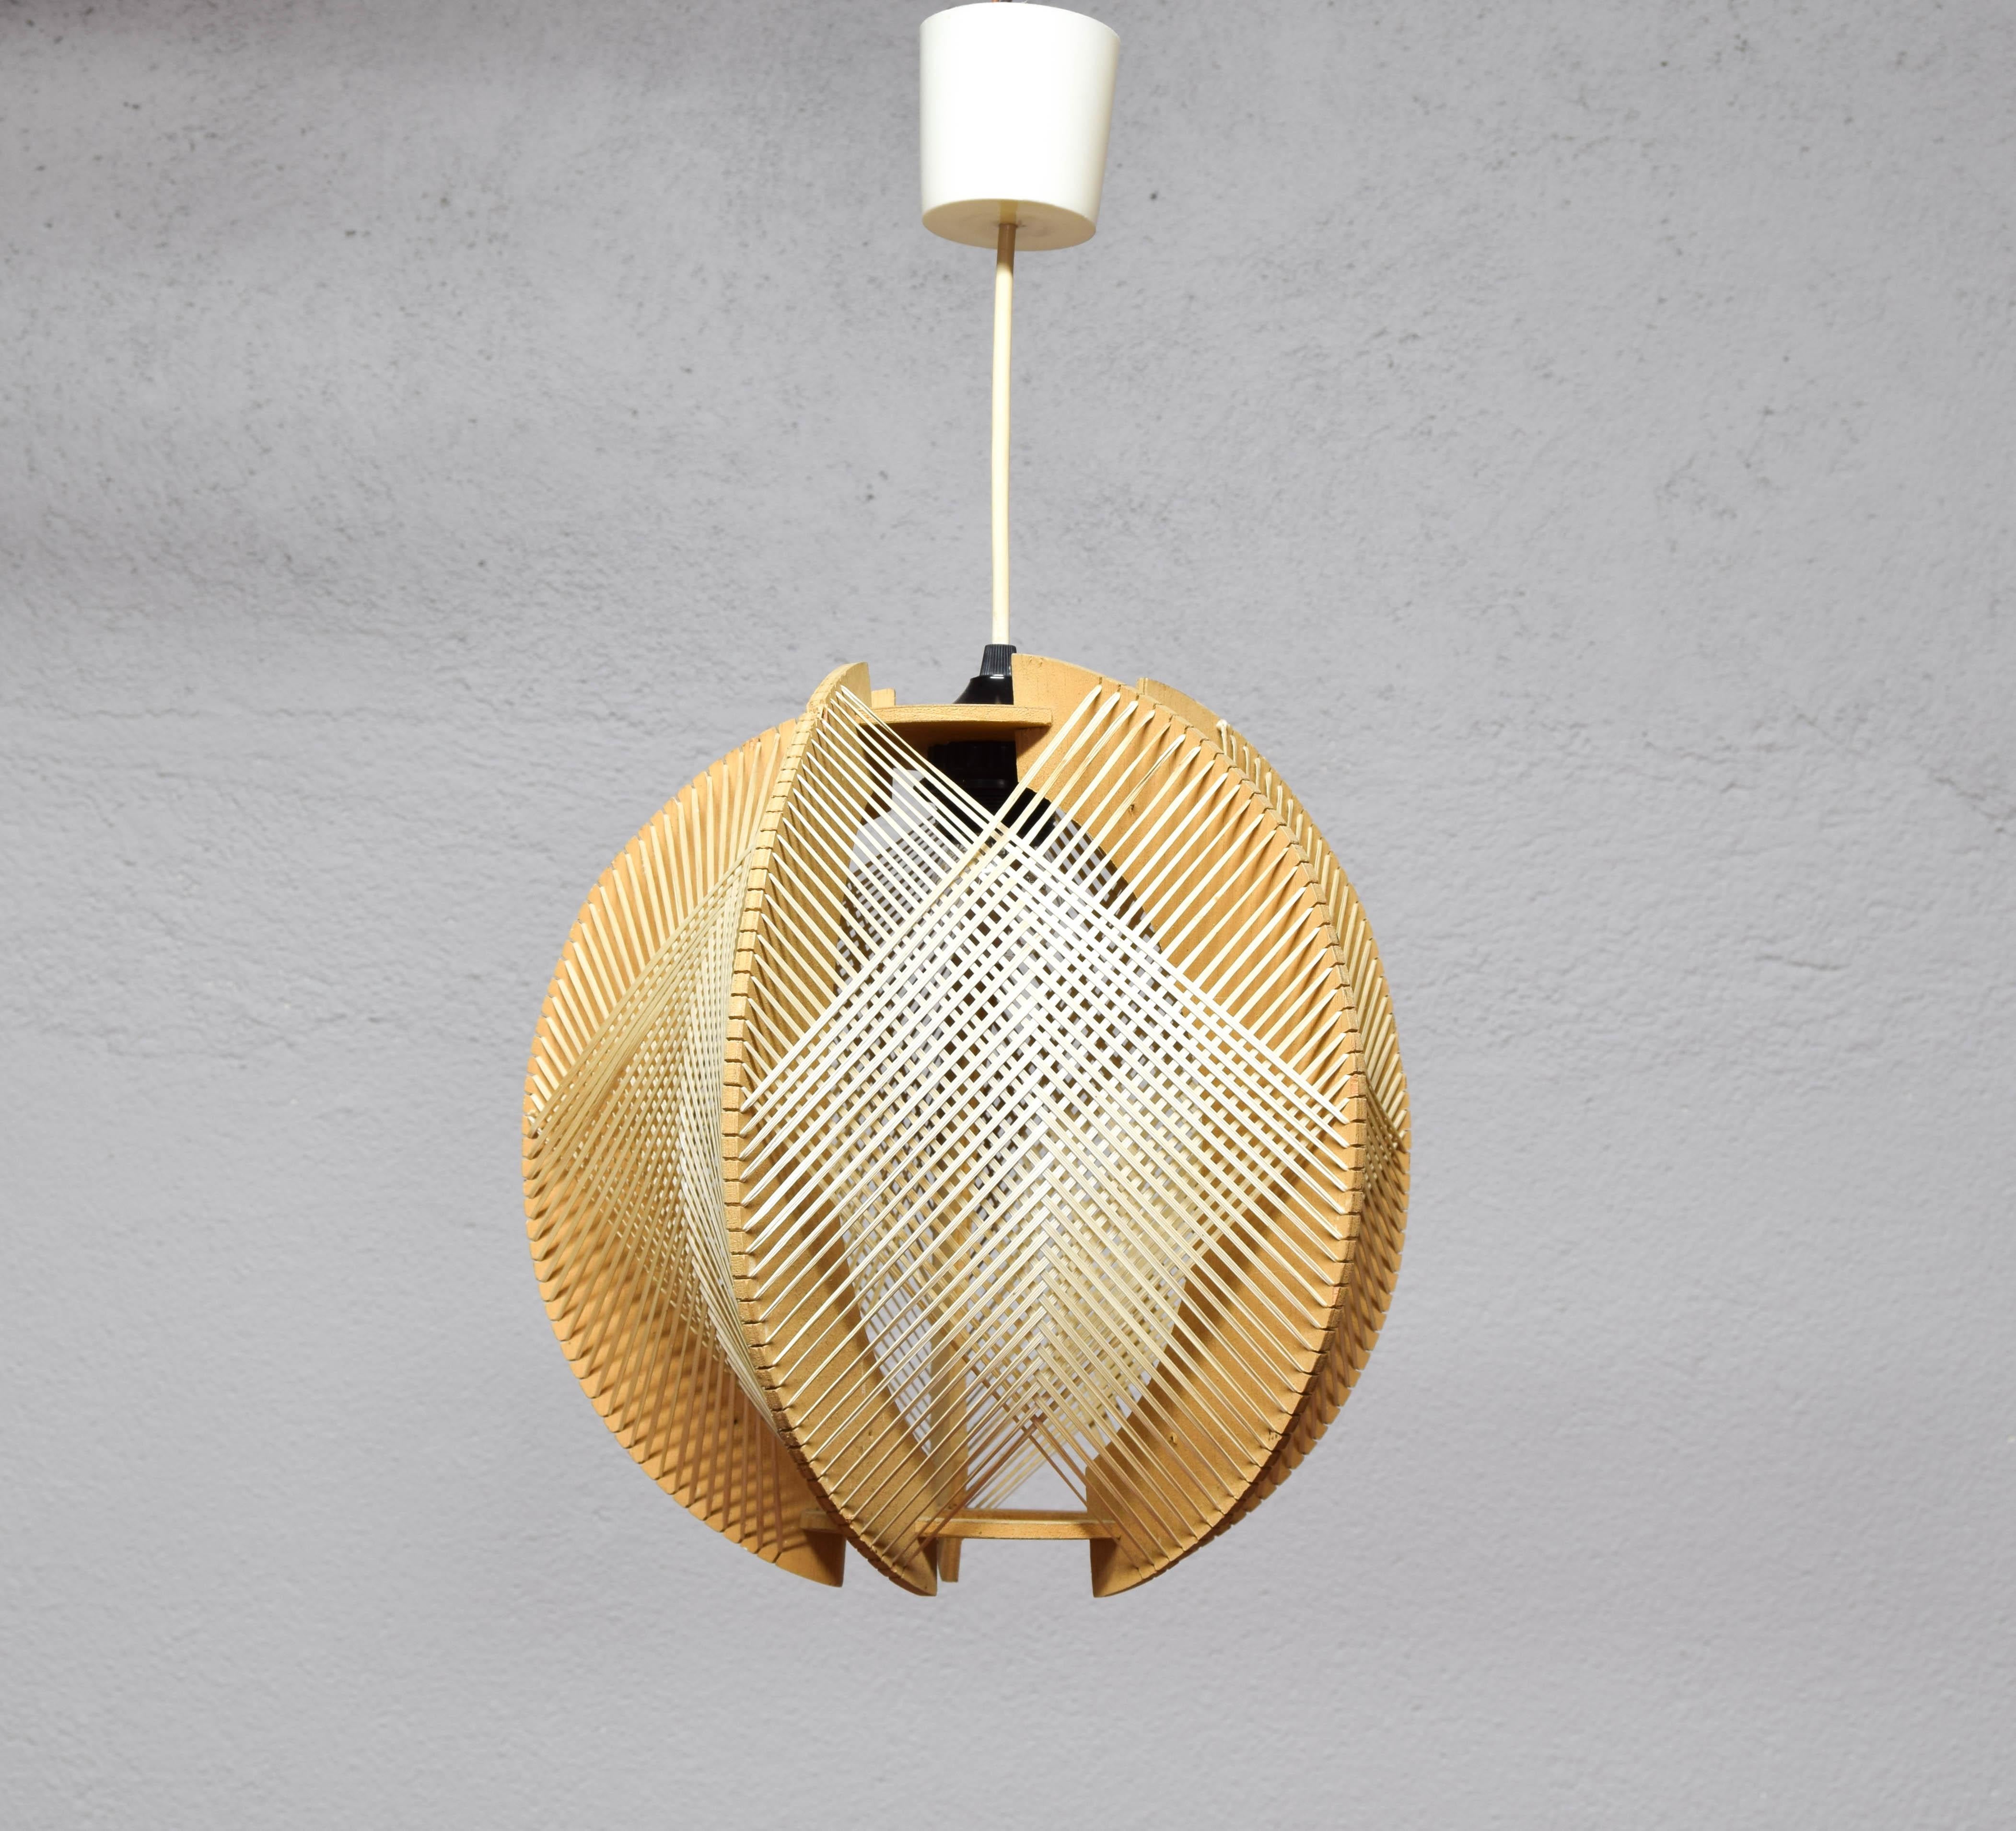 Raffia and wood Scandinavian style ceiling lamps. 

Formed by sheets of wood that are arranged in a circular shape and linked by a multitude of raffia threads that achieve a set that combines geometric and natural drawings in equal parts.
When